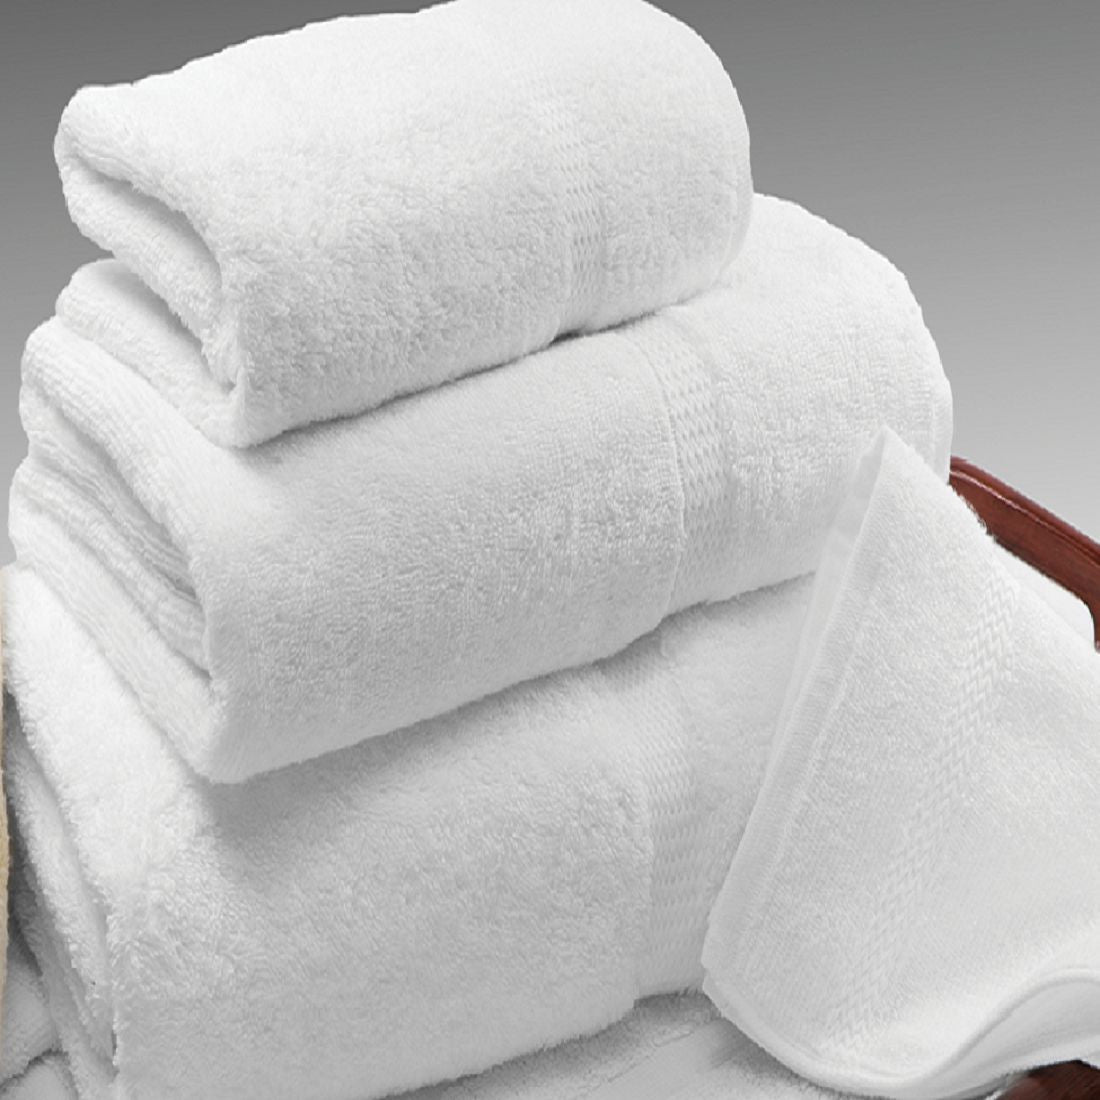 STF (Value Pack of 6) White Hotel Bath Towels Bulk 24x48 Inches - 100%  Cotton Economy Cheap Bath Towels for Commercial Uses, Gym, Salon, Spa &  Hair 